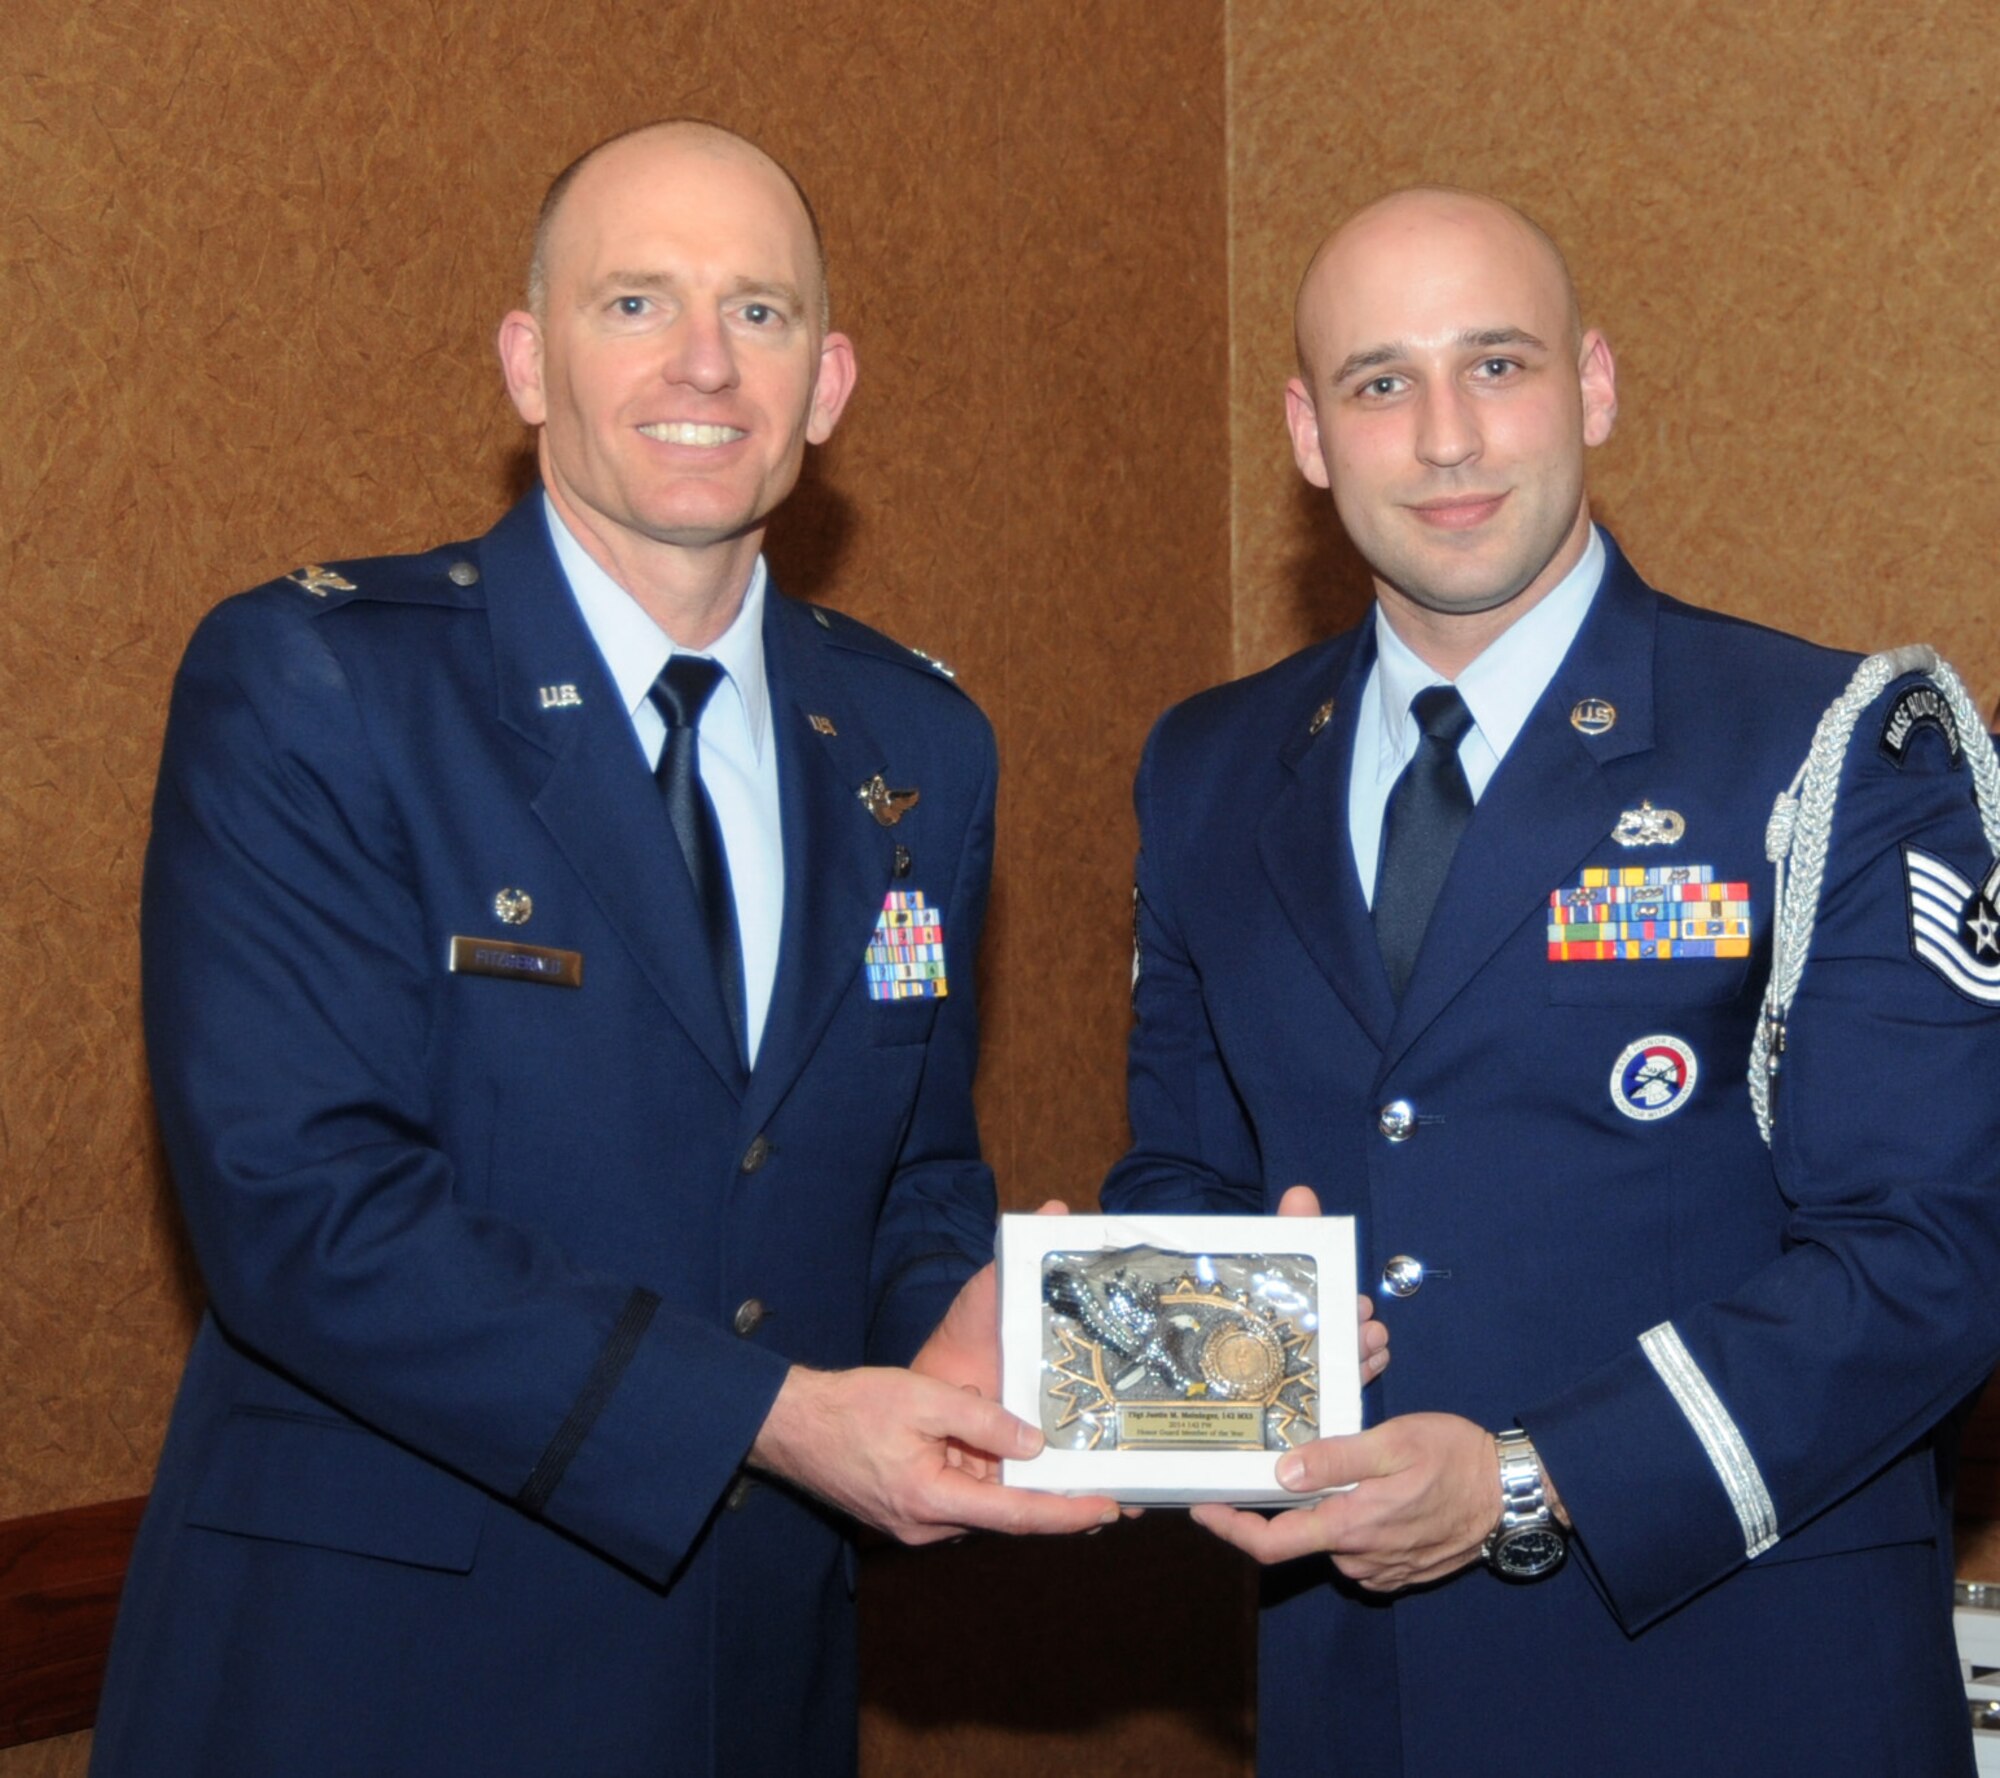 Oregon Air National Guard Col. Paul Fitzgerald, 142nd Fighter Wing commander, left, presents the 142nd Fighter Wing Honor Guard Member of the Year Award to Tech. Sgt. Justin Meininger, assigned to the 142nd Maintenance Group, right, during the 21st Annual Oregon Air National Guard Awards Banquet, March 14, 2015, Portland, Ore. (U.S. Air National Guard photo by Tech. Sgt. Emily Thompson, 142nd Fighter Wing Public Affairs/Released)